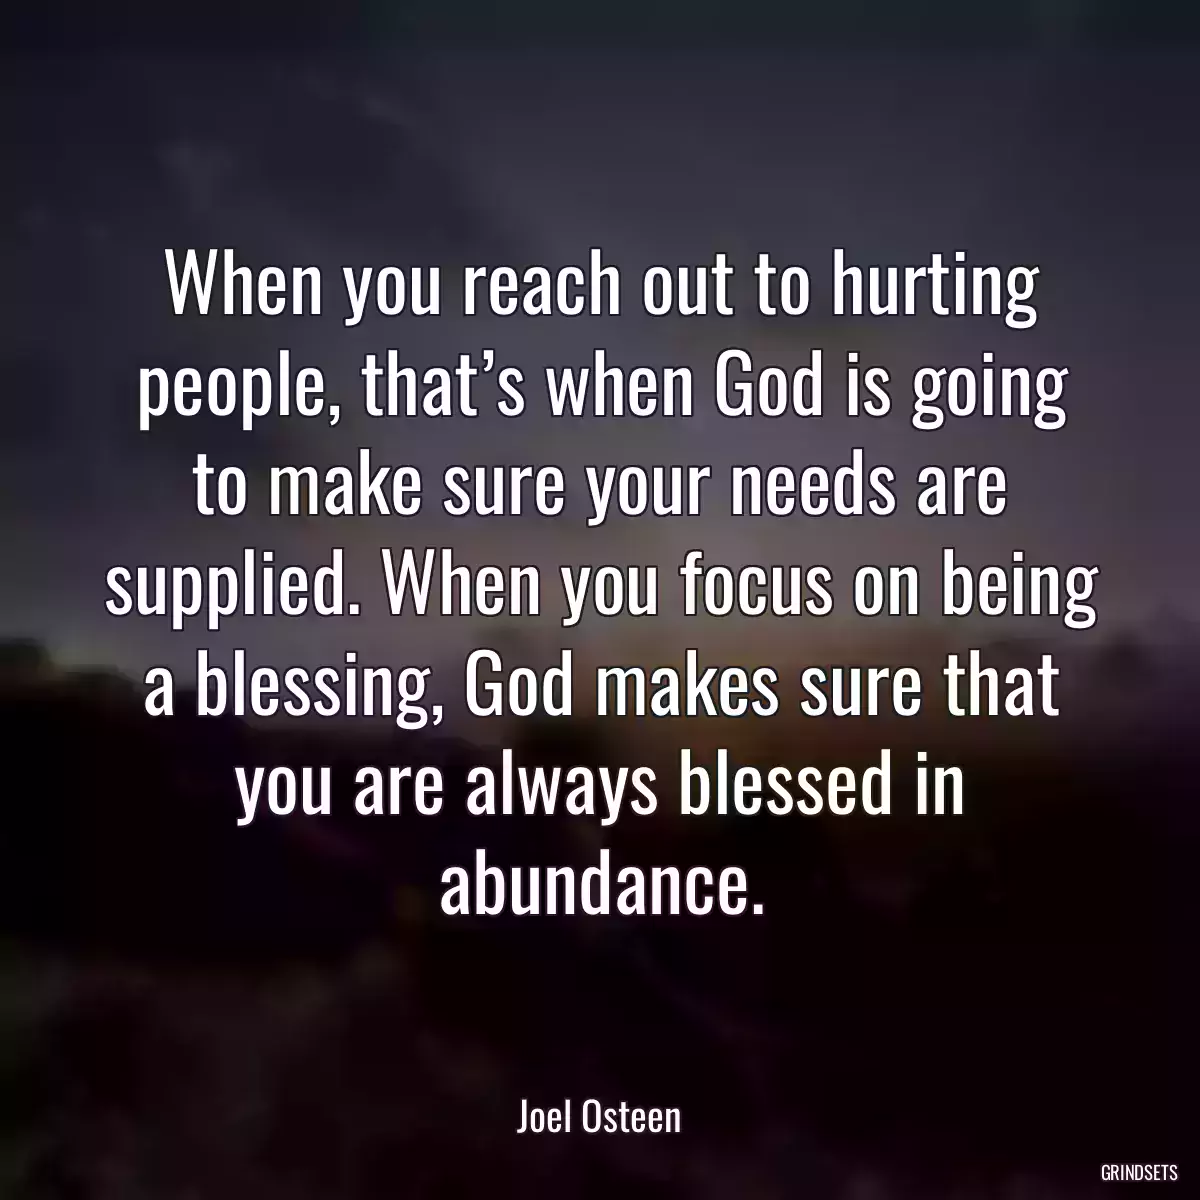 When you reach out to hurting people, that’s when God is going to make sure your needs are supplied. When you focus on being a blessing, God makes sure that you are always blessed in abundance.